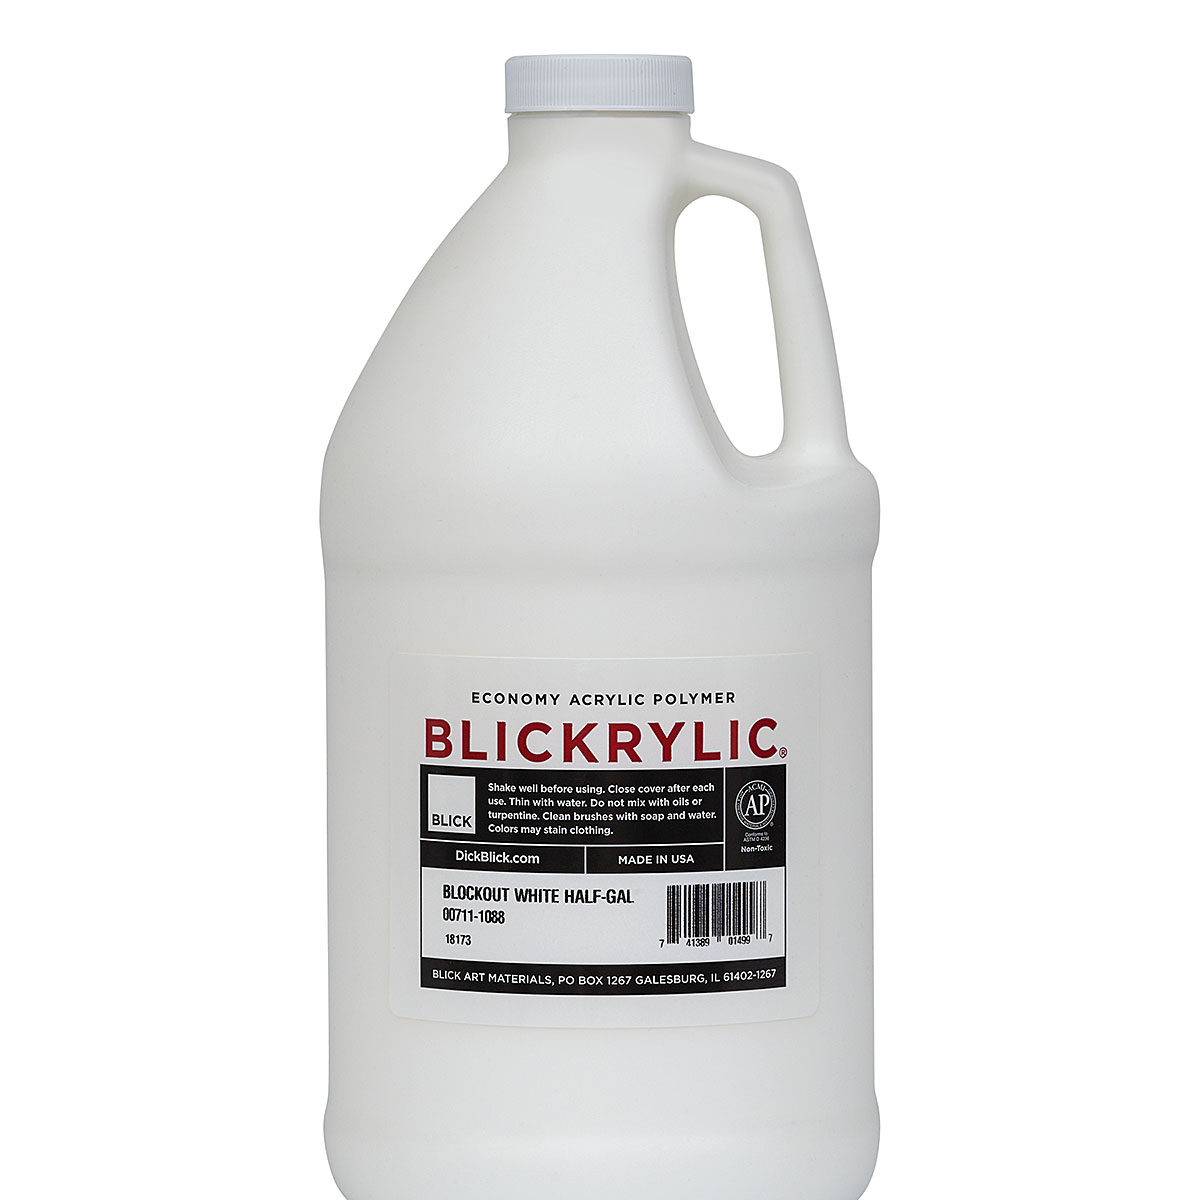 Blickrylic Student Acrylics - Primary Colors, Set of 6, 2 oz Bottles